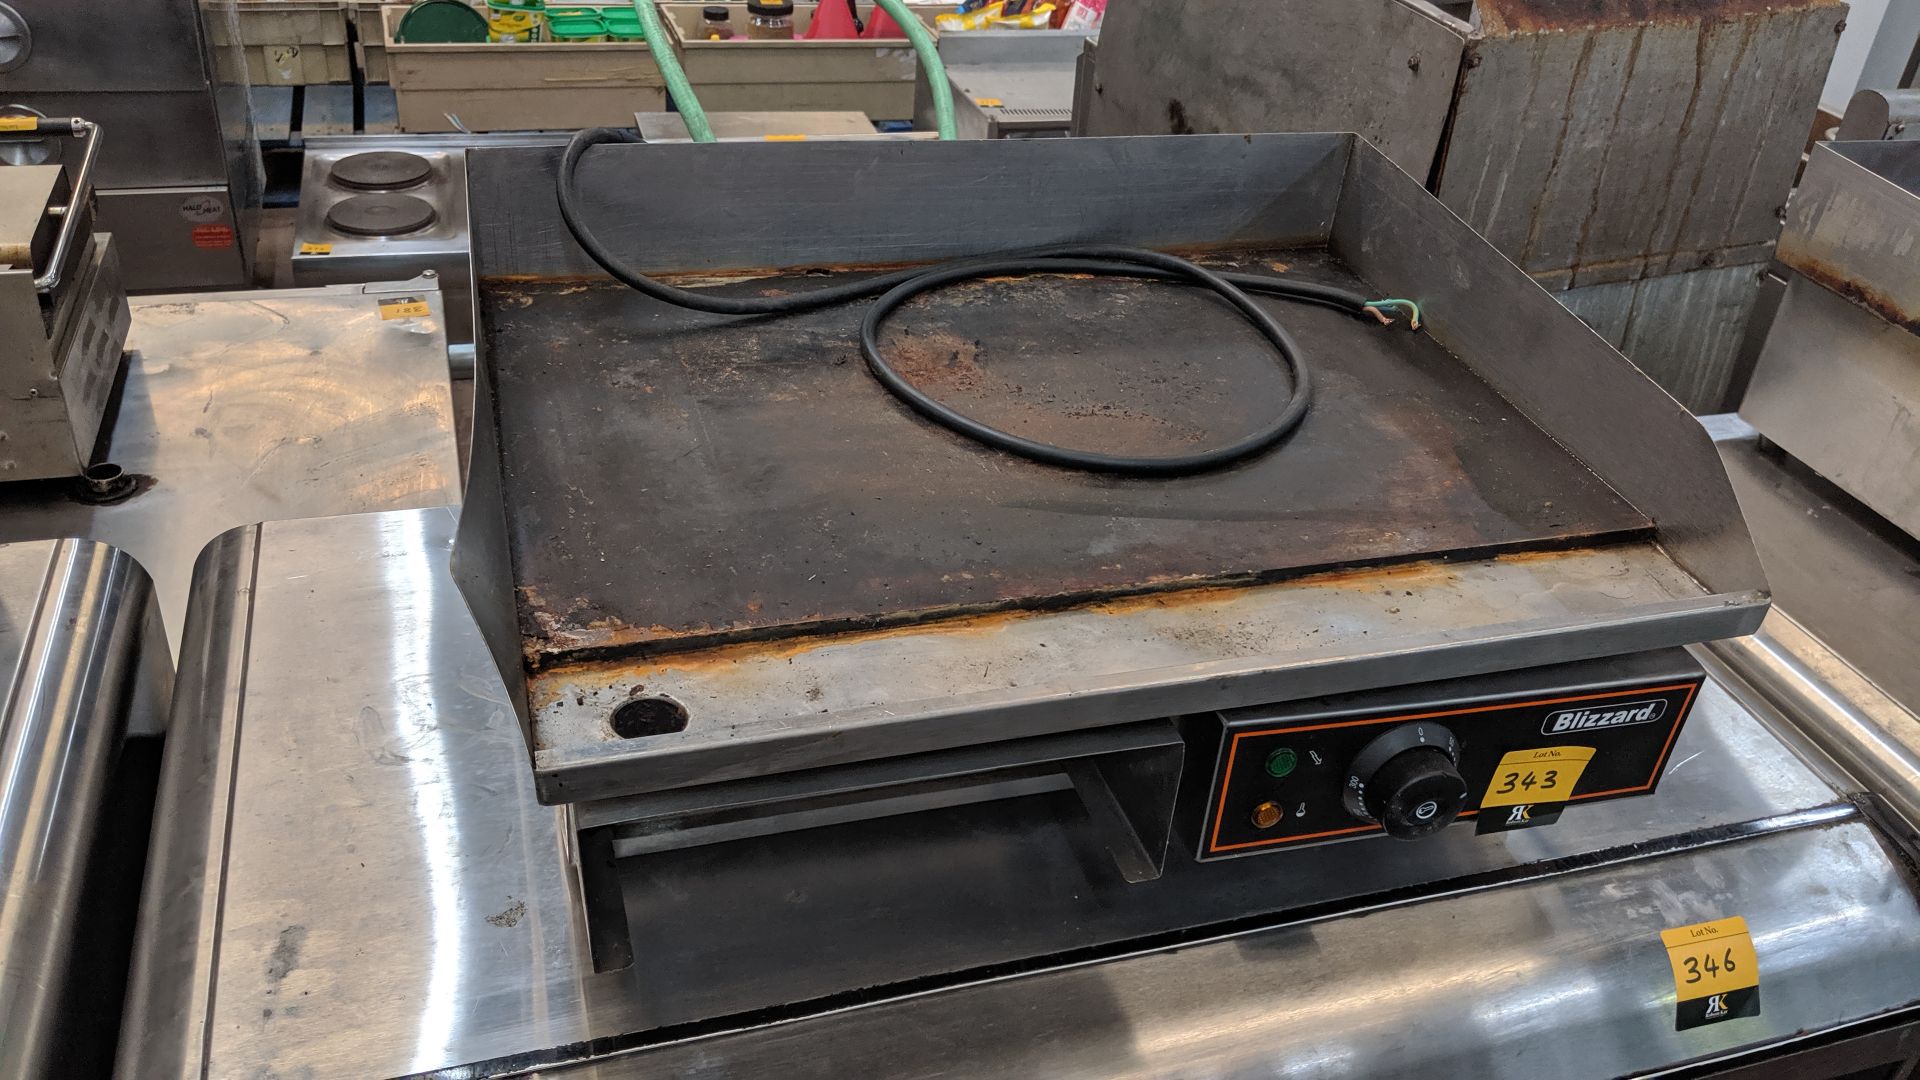 Blizzard benchtop plancha/griddle unit IMPORTANT: Please remember goods successfully bid upon must